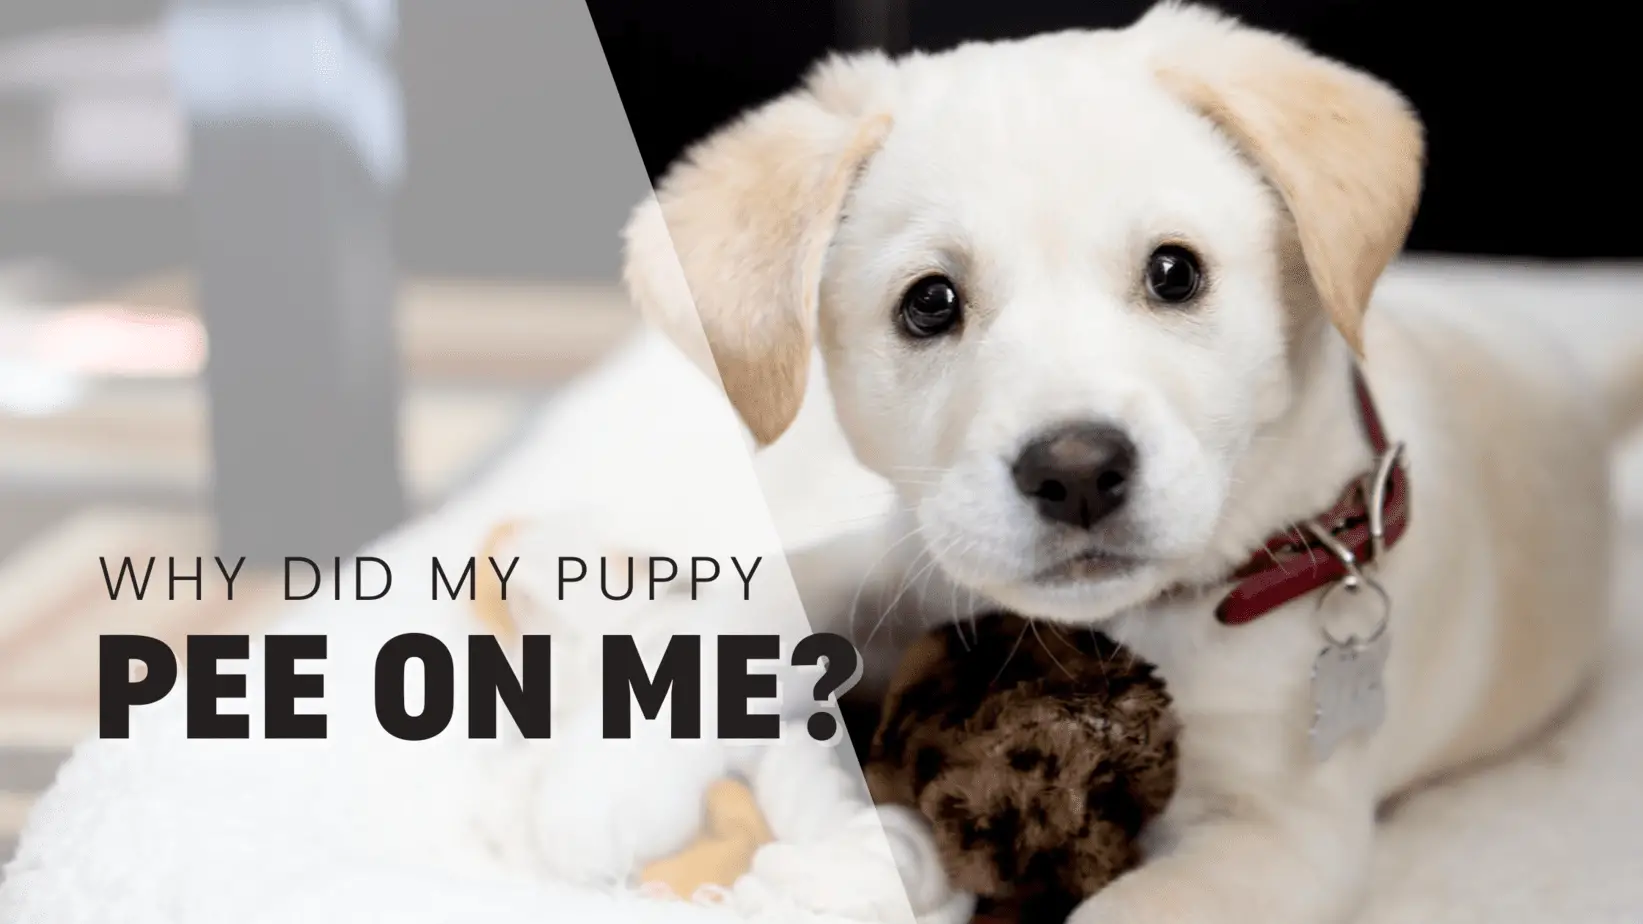 Why Did My Puppy Pee On Me? Puppy Expert Explains